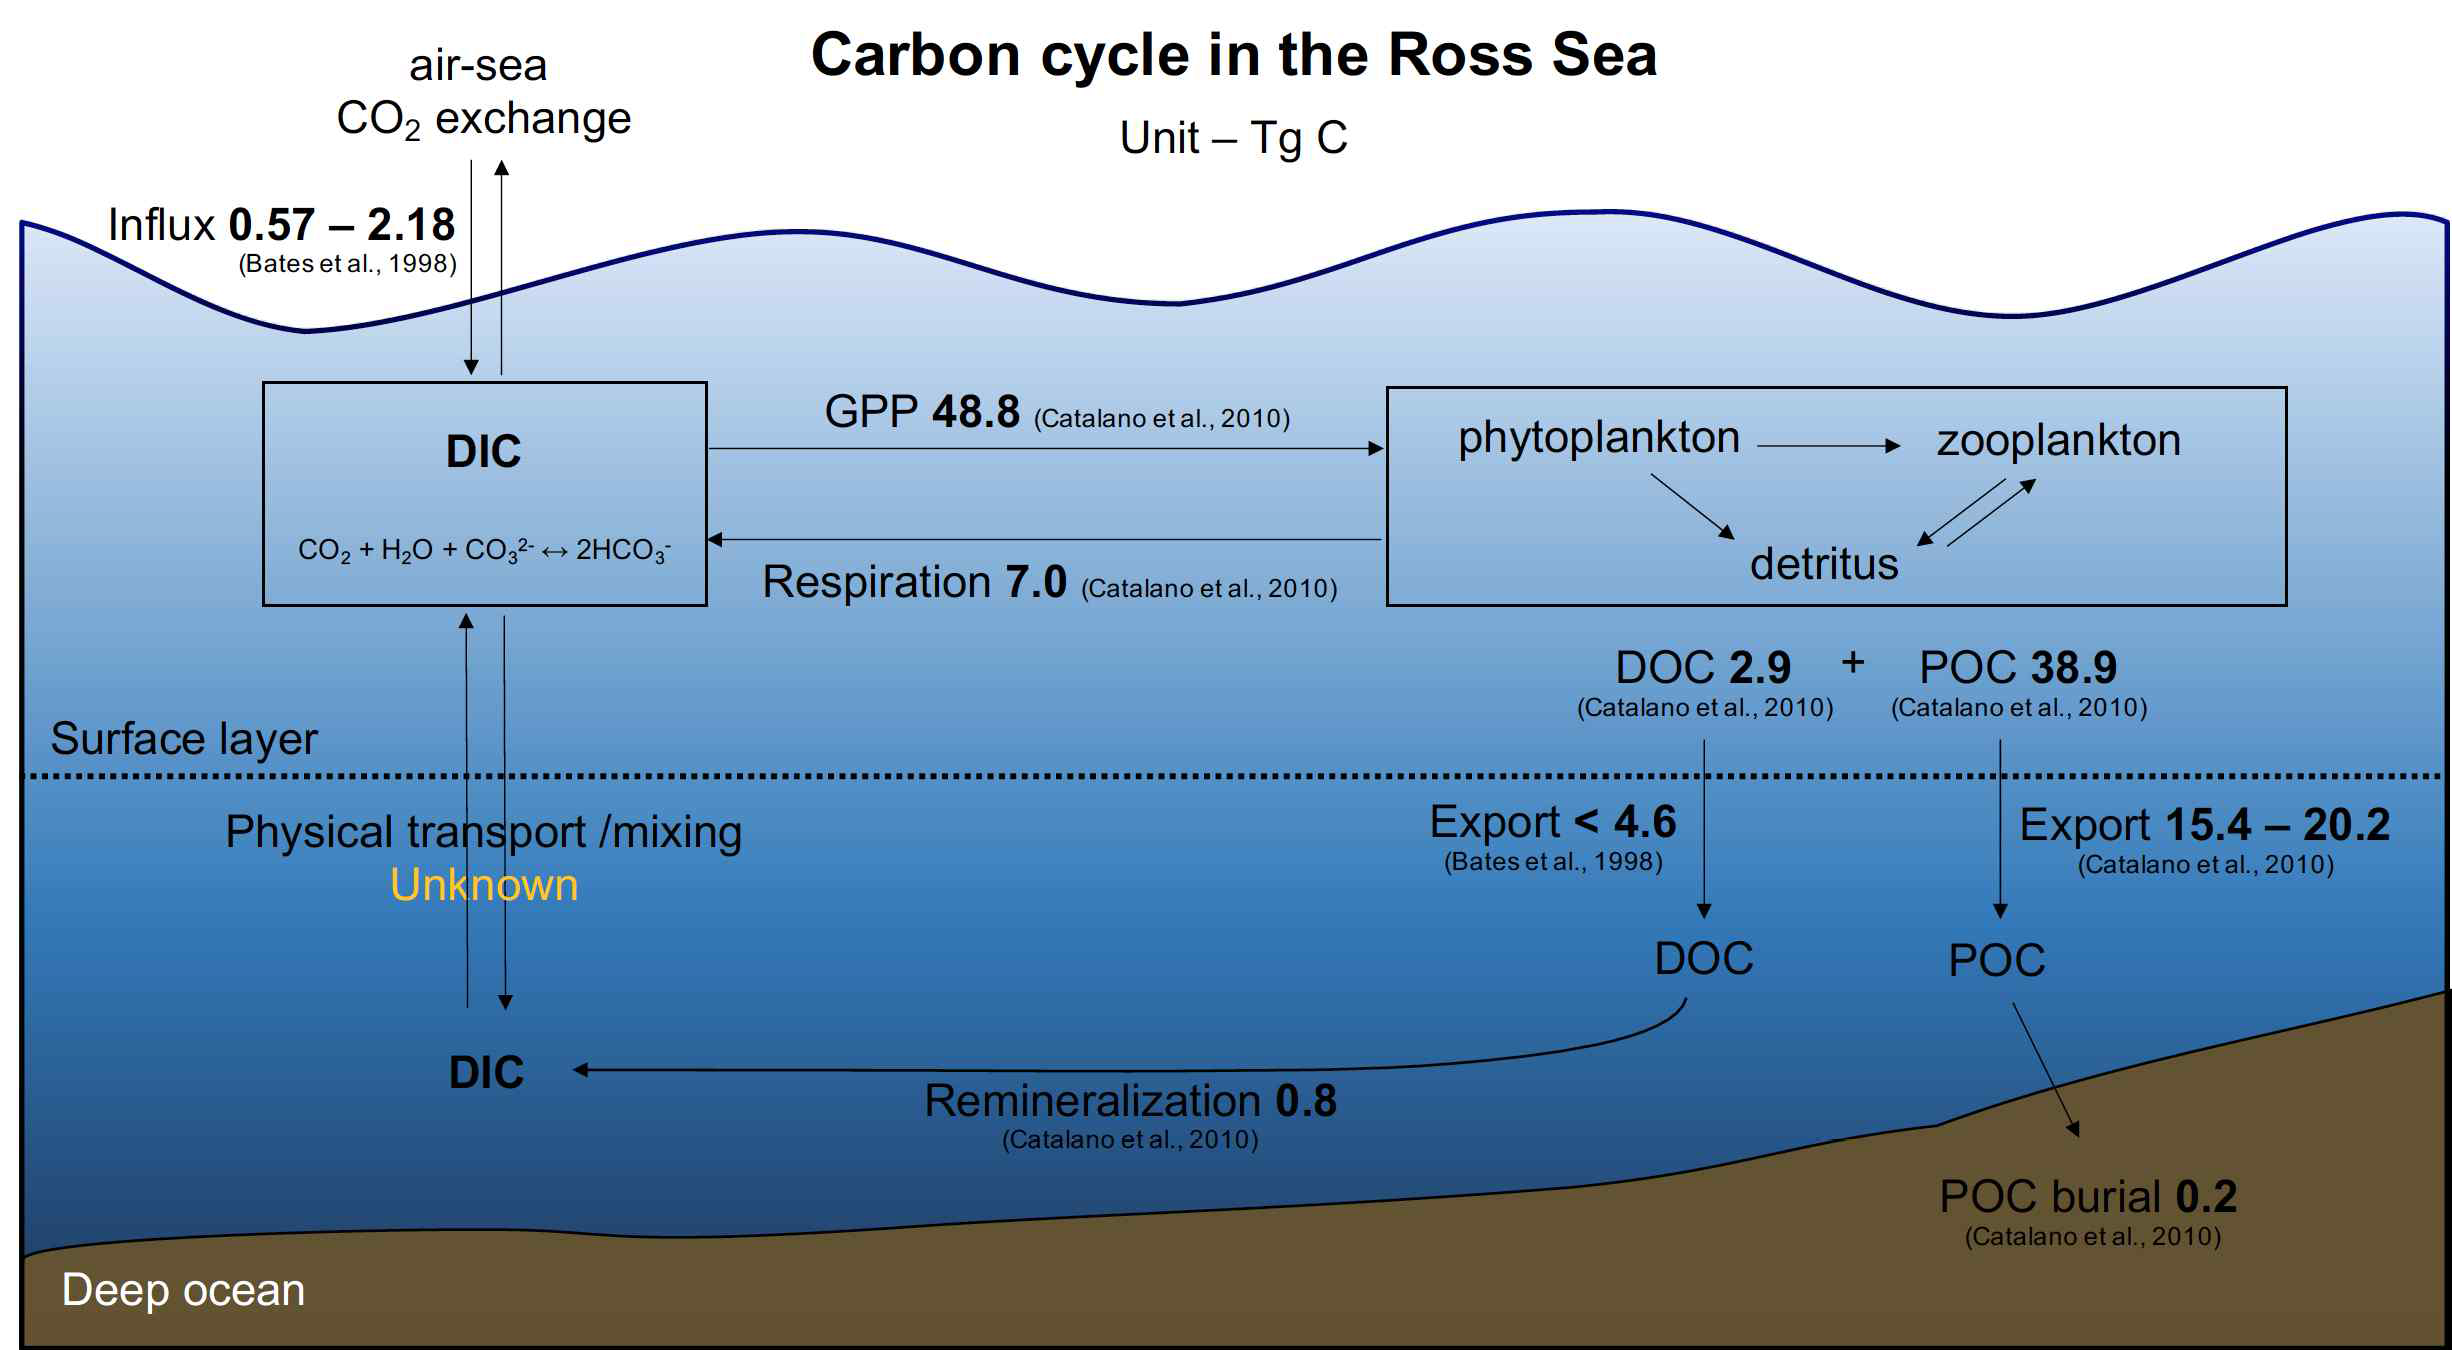 Schematic illustration showing the carbon cycle in the Ross Sea. Data were obtained from Bates et al. (1998) and Catalano et al. (2010)